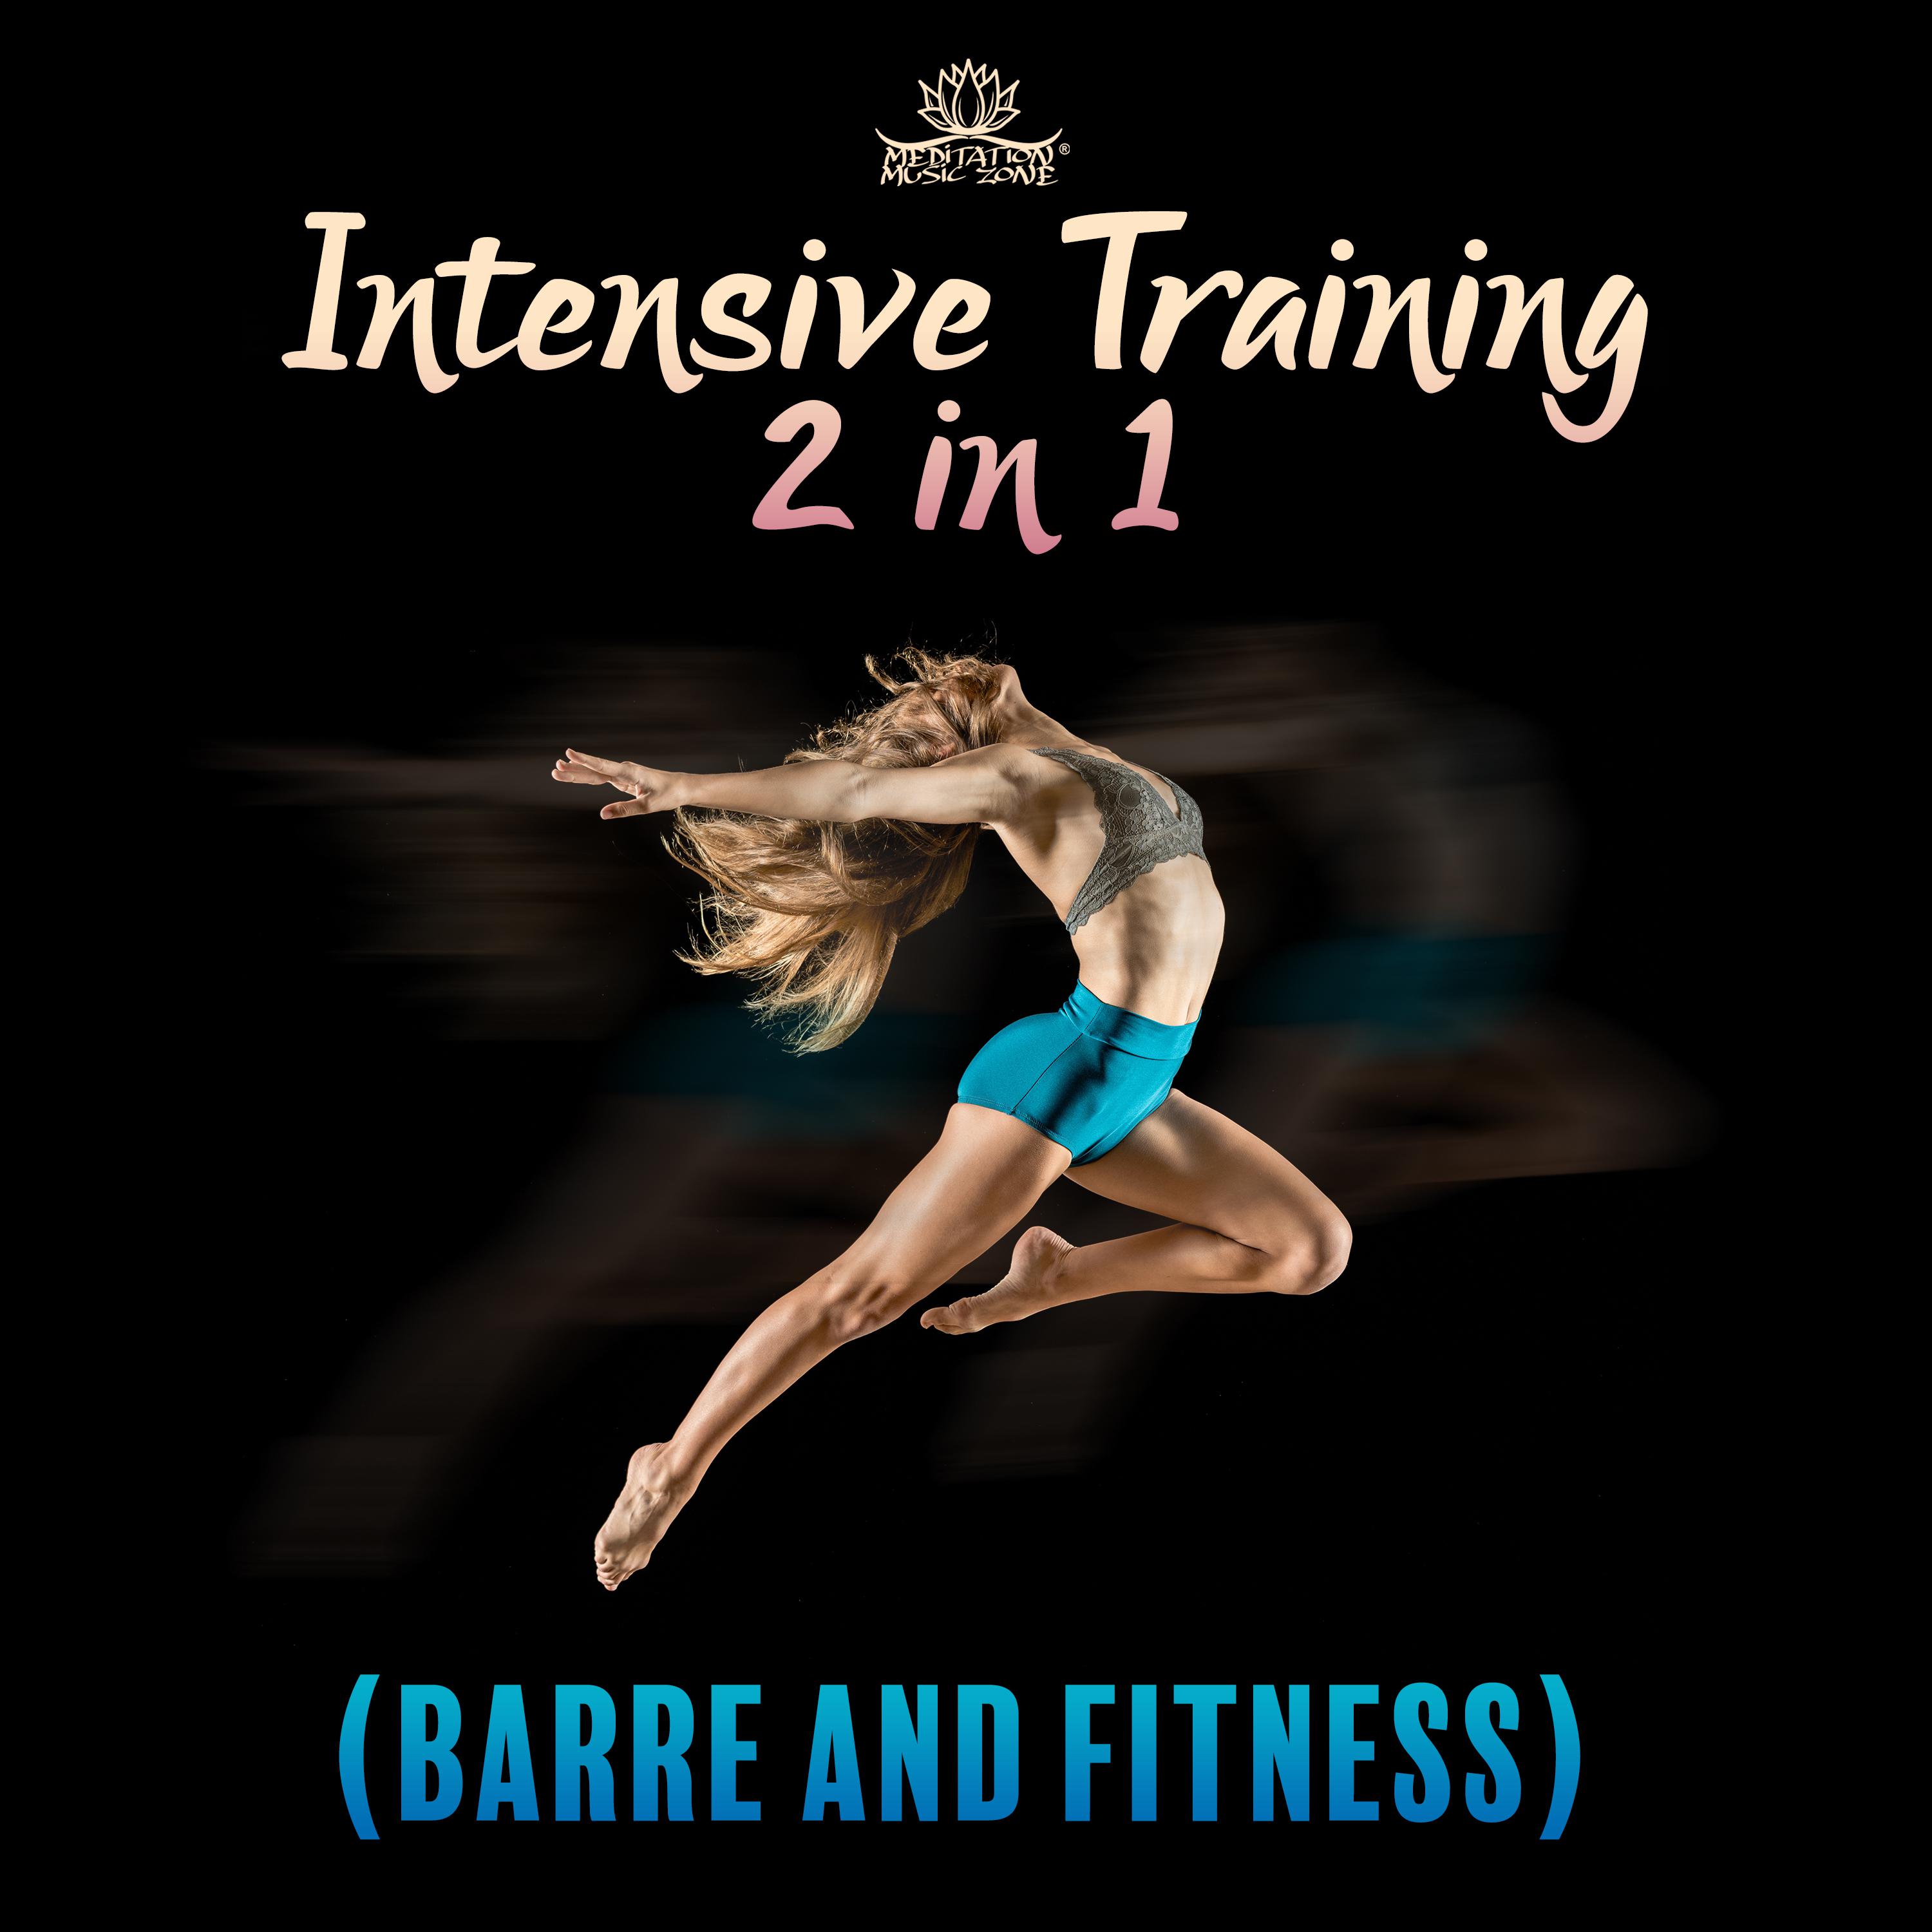 Intensive Training 2 in 1 (Barre and Fitness)